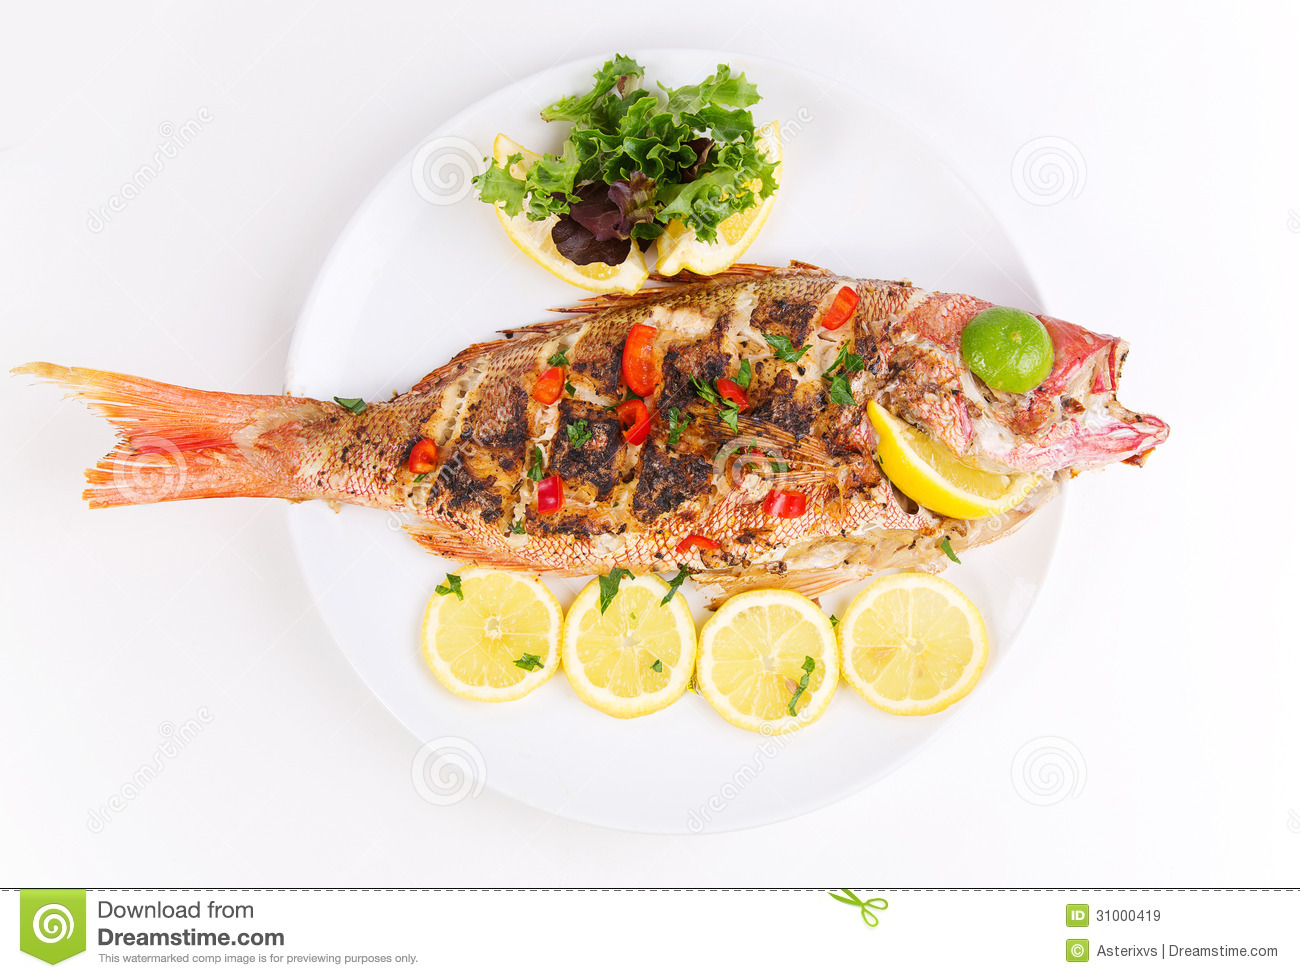 Grilled Red Snapper With Salad Royalty Free Stock Images   Image    